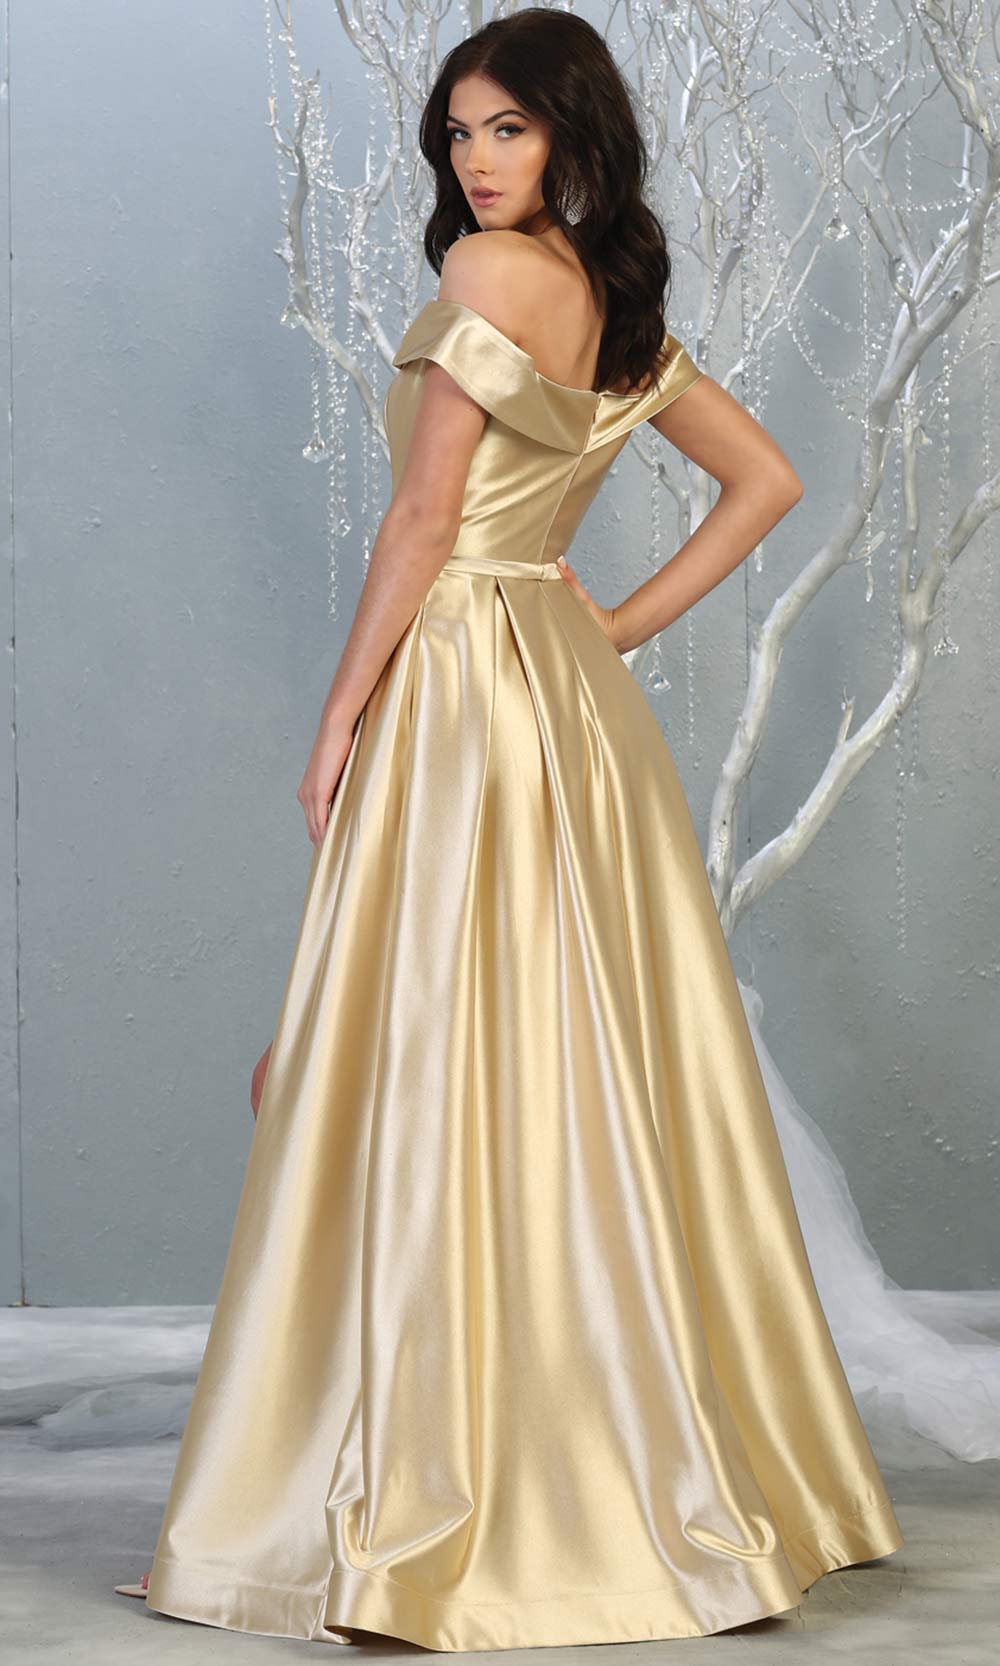 Mayqueen MQ 1781 long champagne off shoulder evening flowy dress w/ high slit. Full length light gold satin gown is perfect for  enagagement/e-shoot dress, formal wedding guest, indowestern gown, evening party dress,prom, bridesmaid.Plus sizes avail-b.jpg